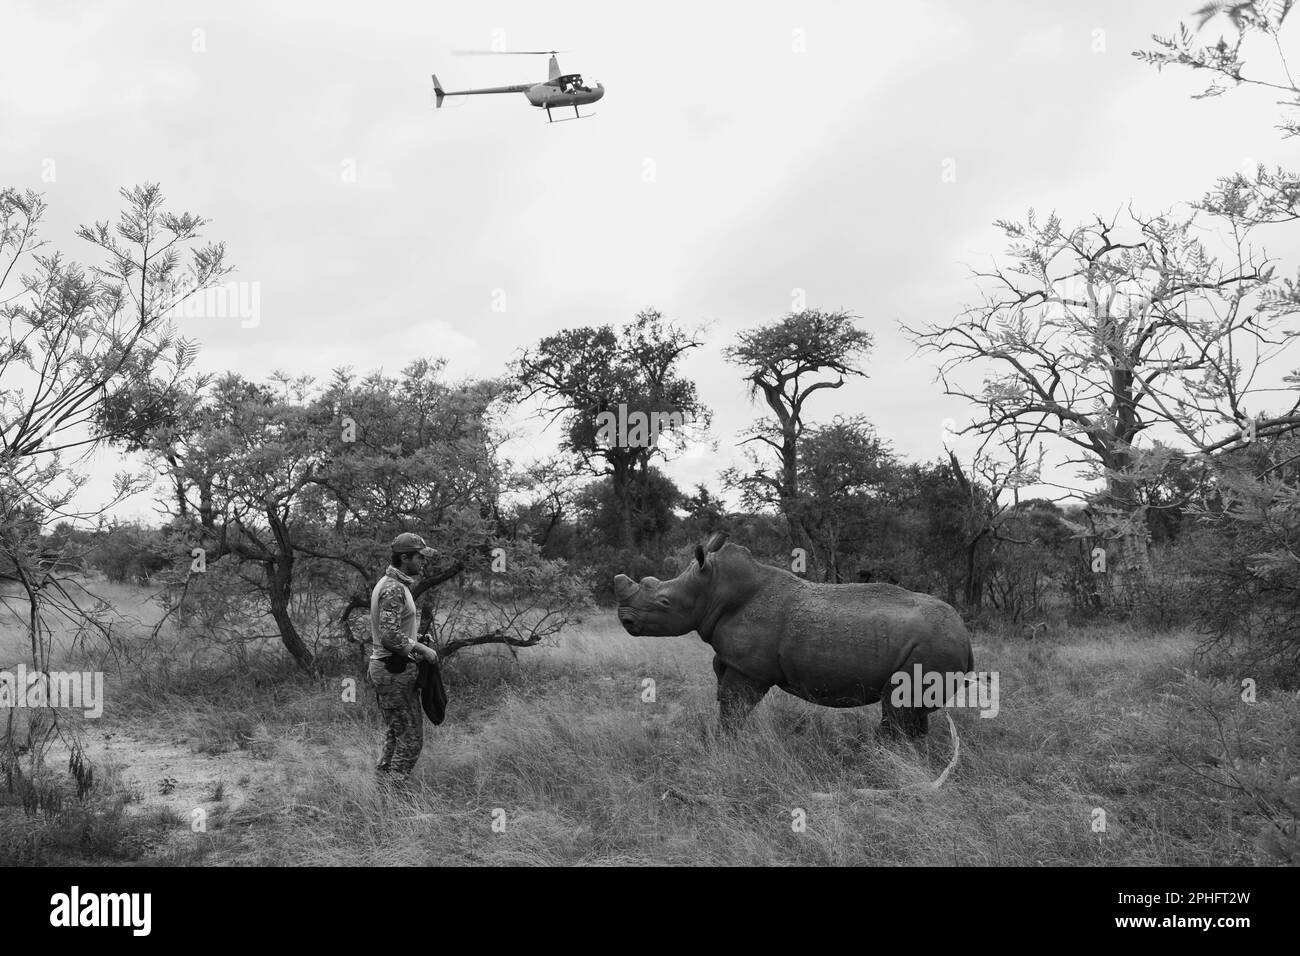 Facing the rhino. THESE HEART-BREAKING images show the dehorning of a rhino in a bid to protect the rhino from being killed by poachers for the ivory Stock Photo